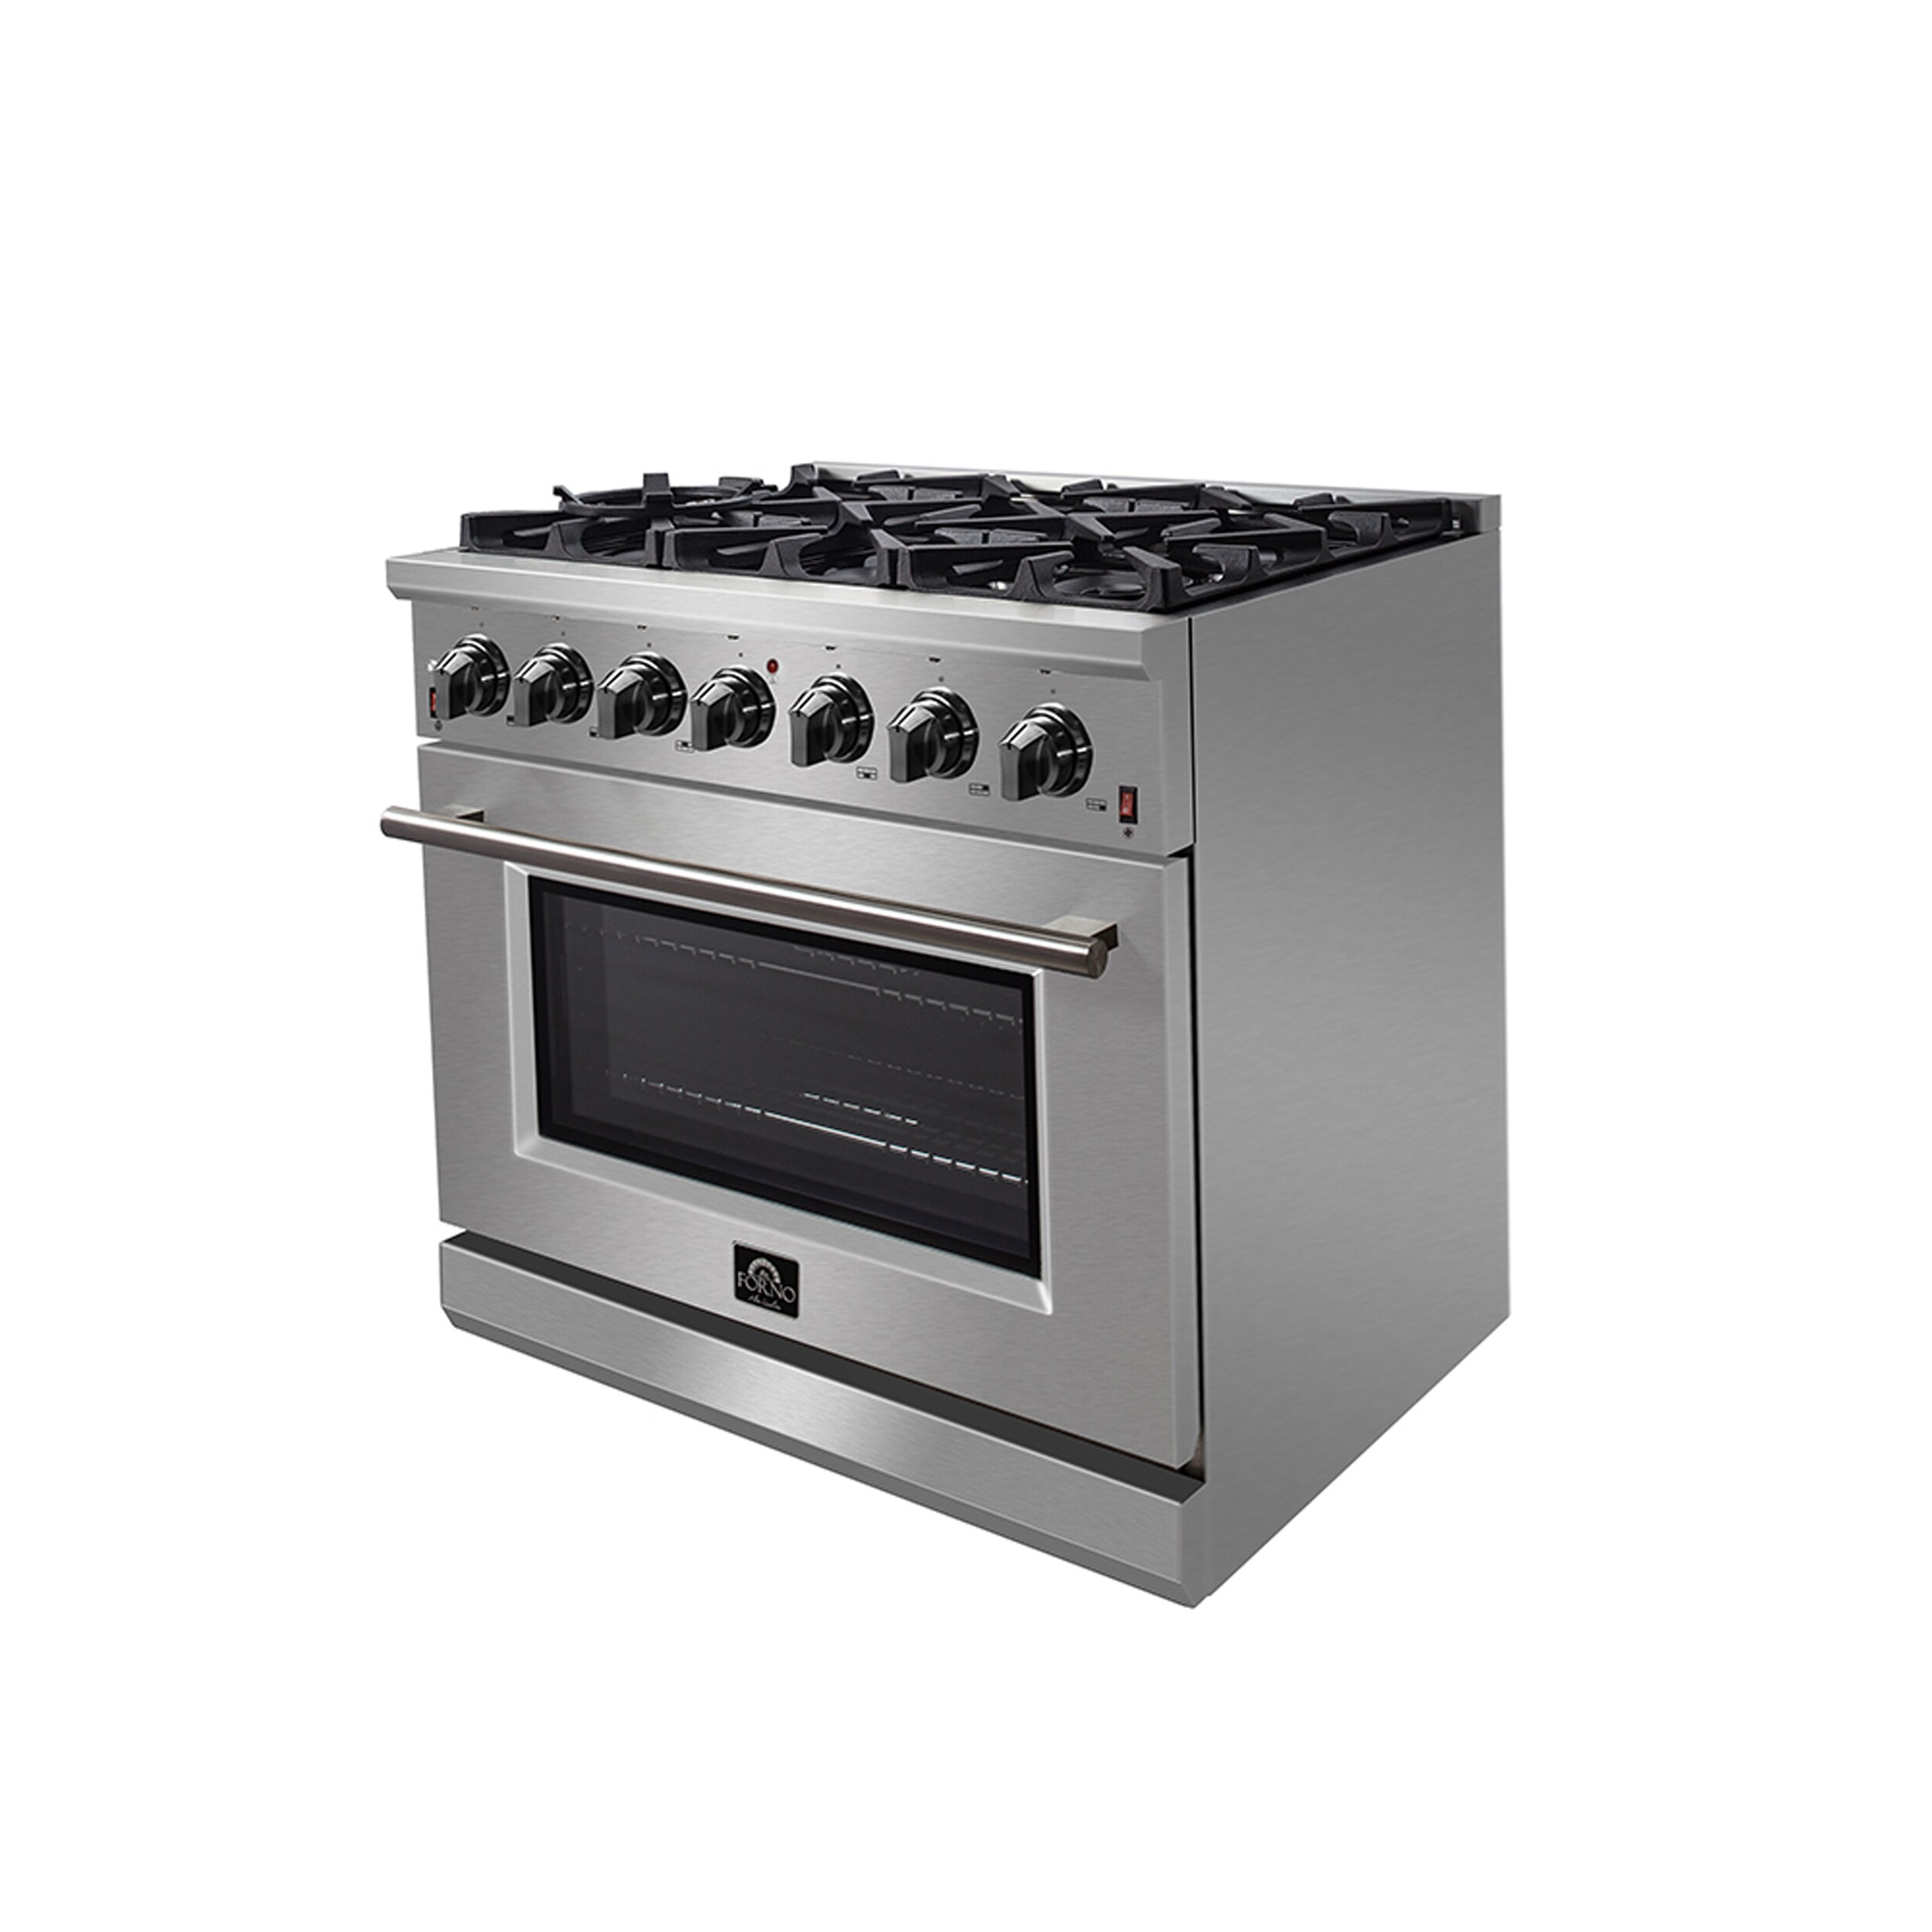  FORNO Vittorio Full Gas 36 Inch. French Door Freestanding  Range 6 Sealed Burners Cooktop - 5.36 Cu. Ft. Gas Convection Oven Capacity  - Stainless Steel Stove Range Heavy Duty Cast Iron Grates : Appliances